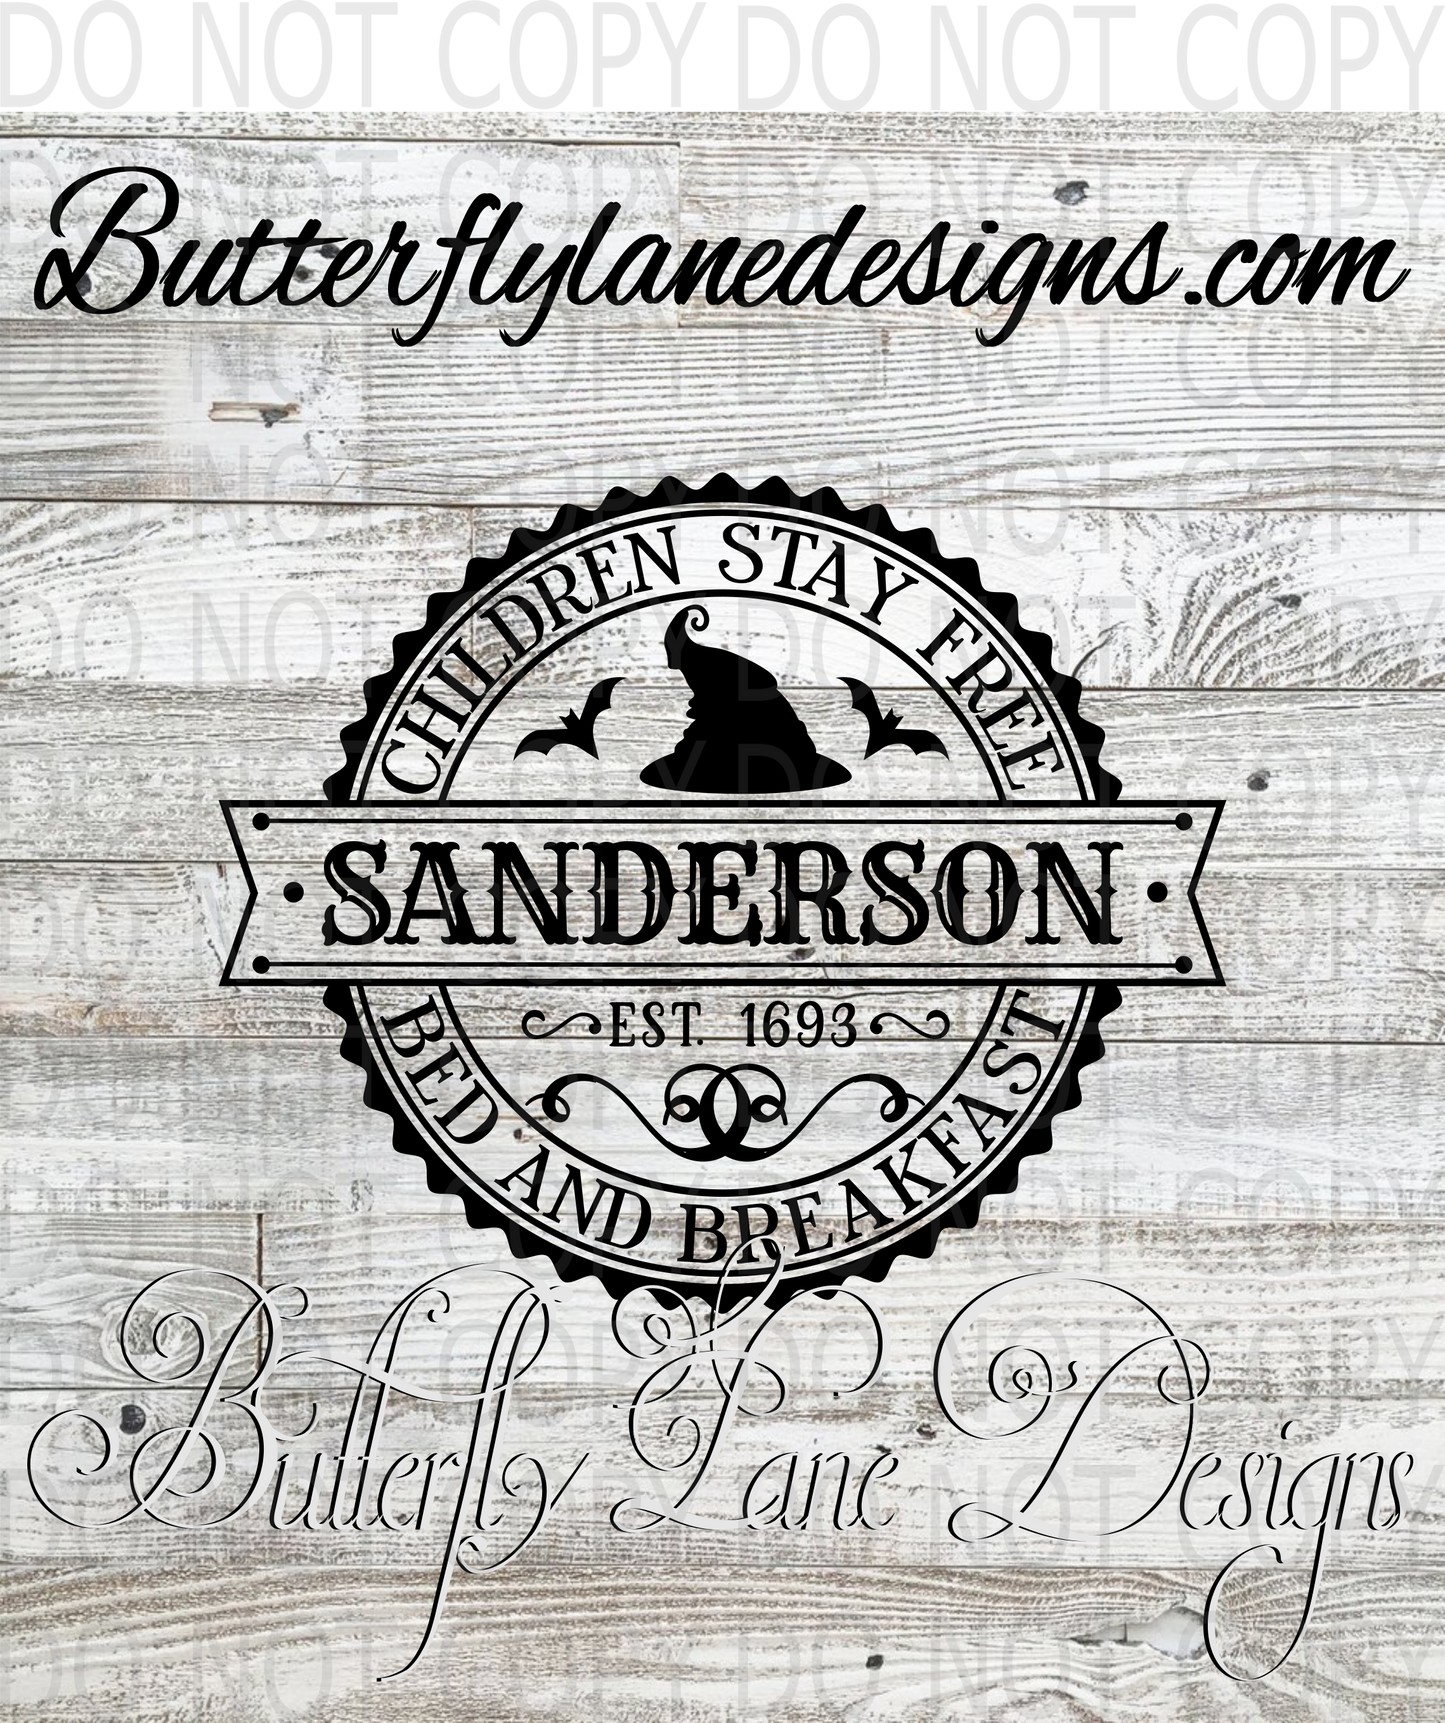 Sanderson-Children stay for free-Clear Decal :: VC Decal